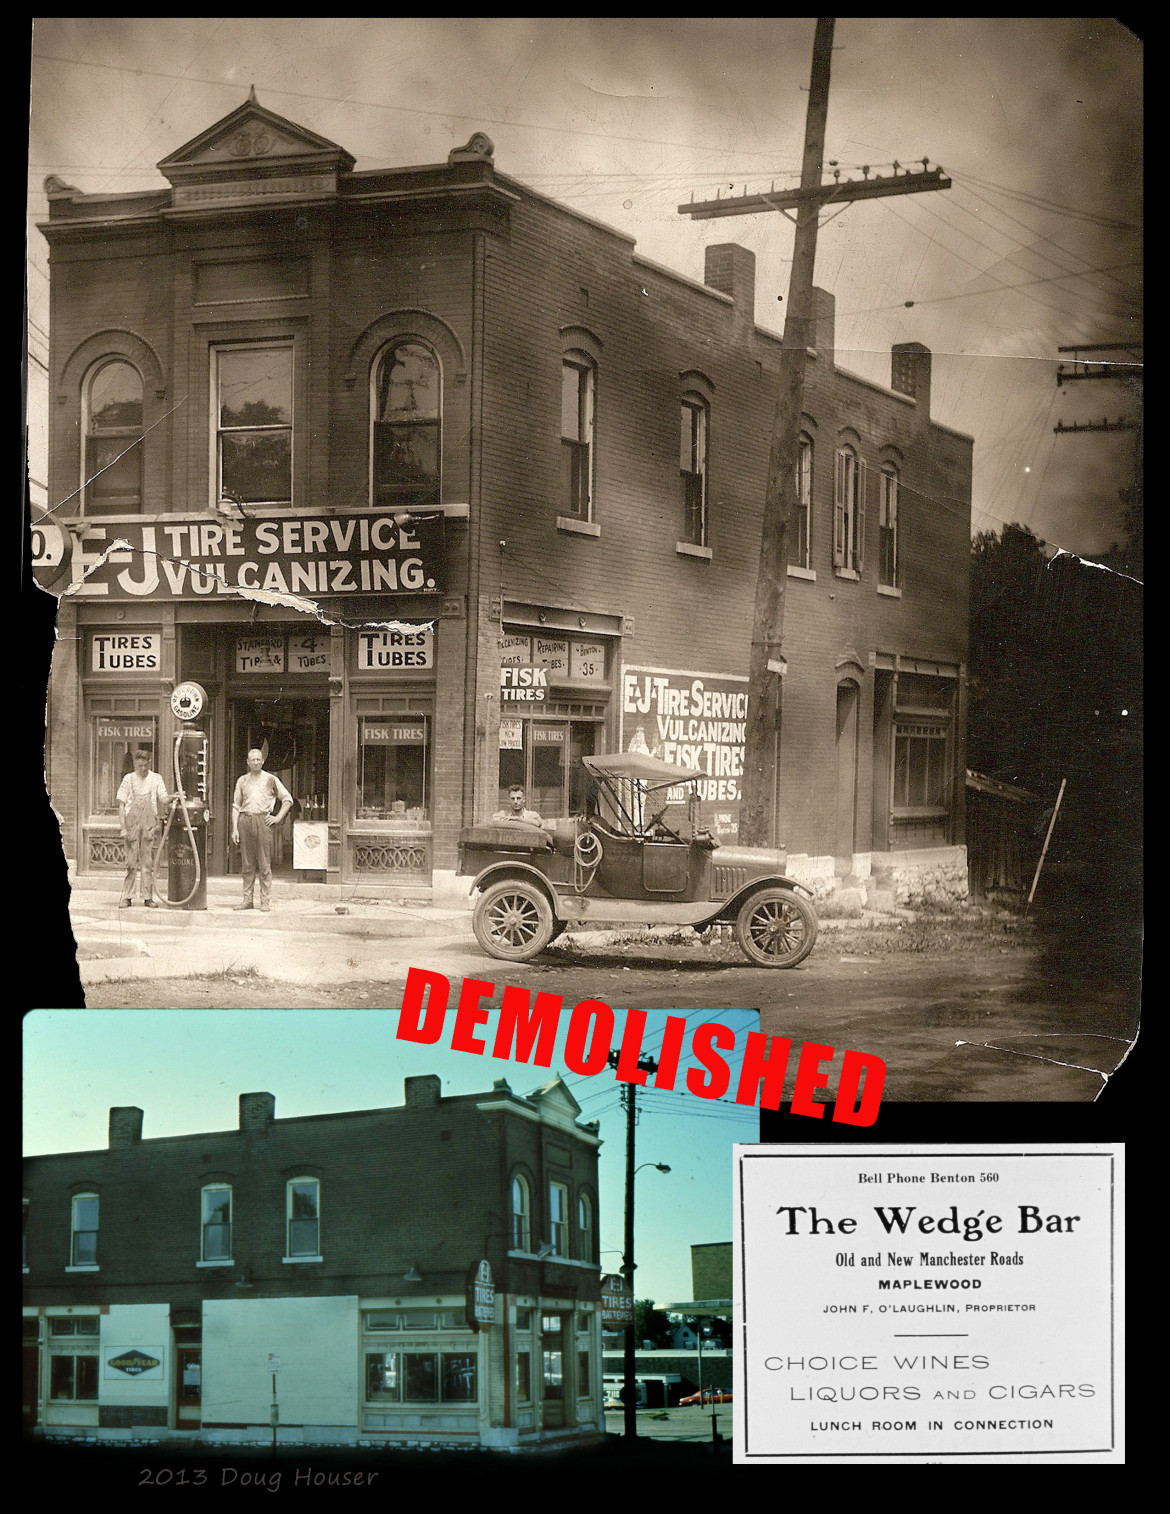 The Wedge, located at Manchester and Southwest, was another wonderful building that was demolished unnecessarily. 